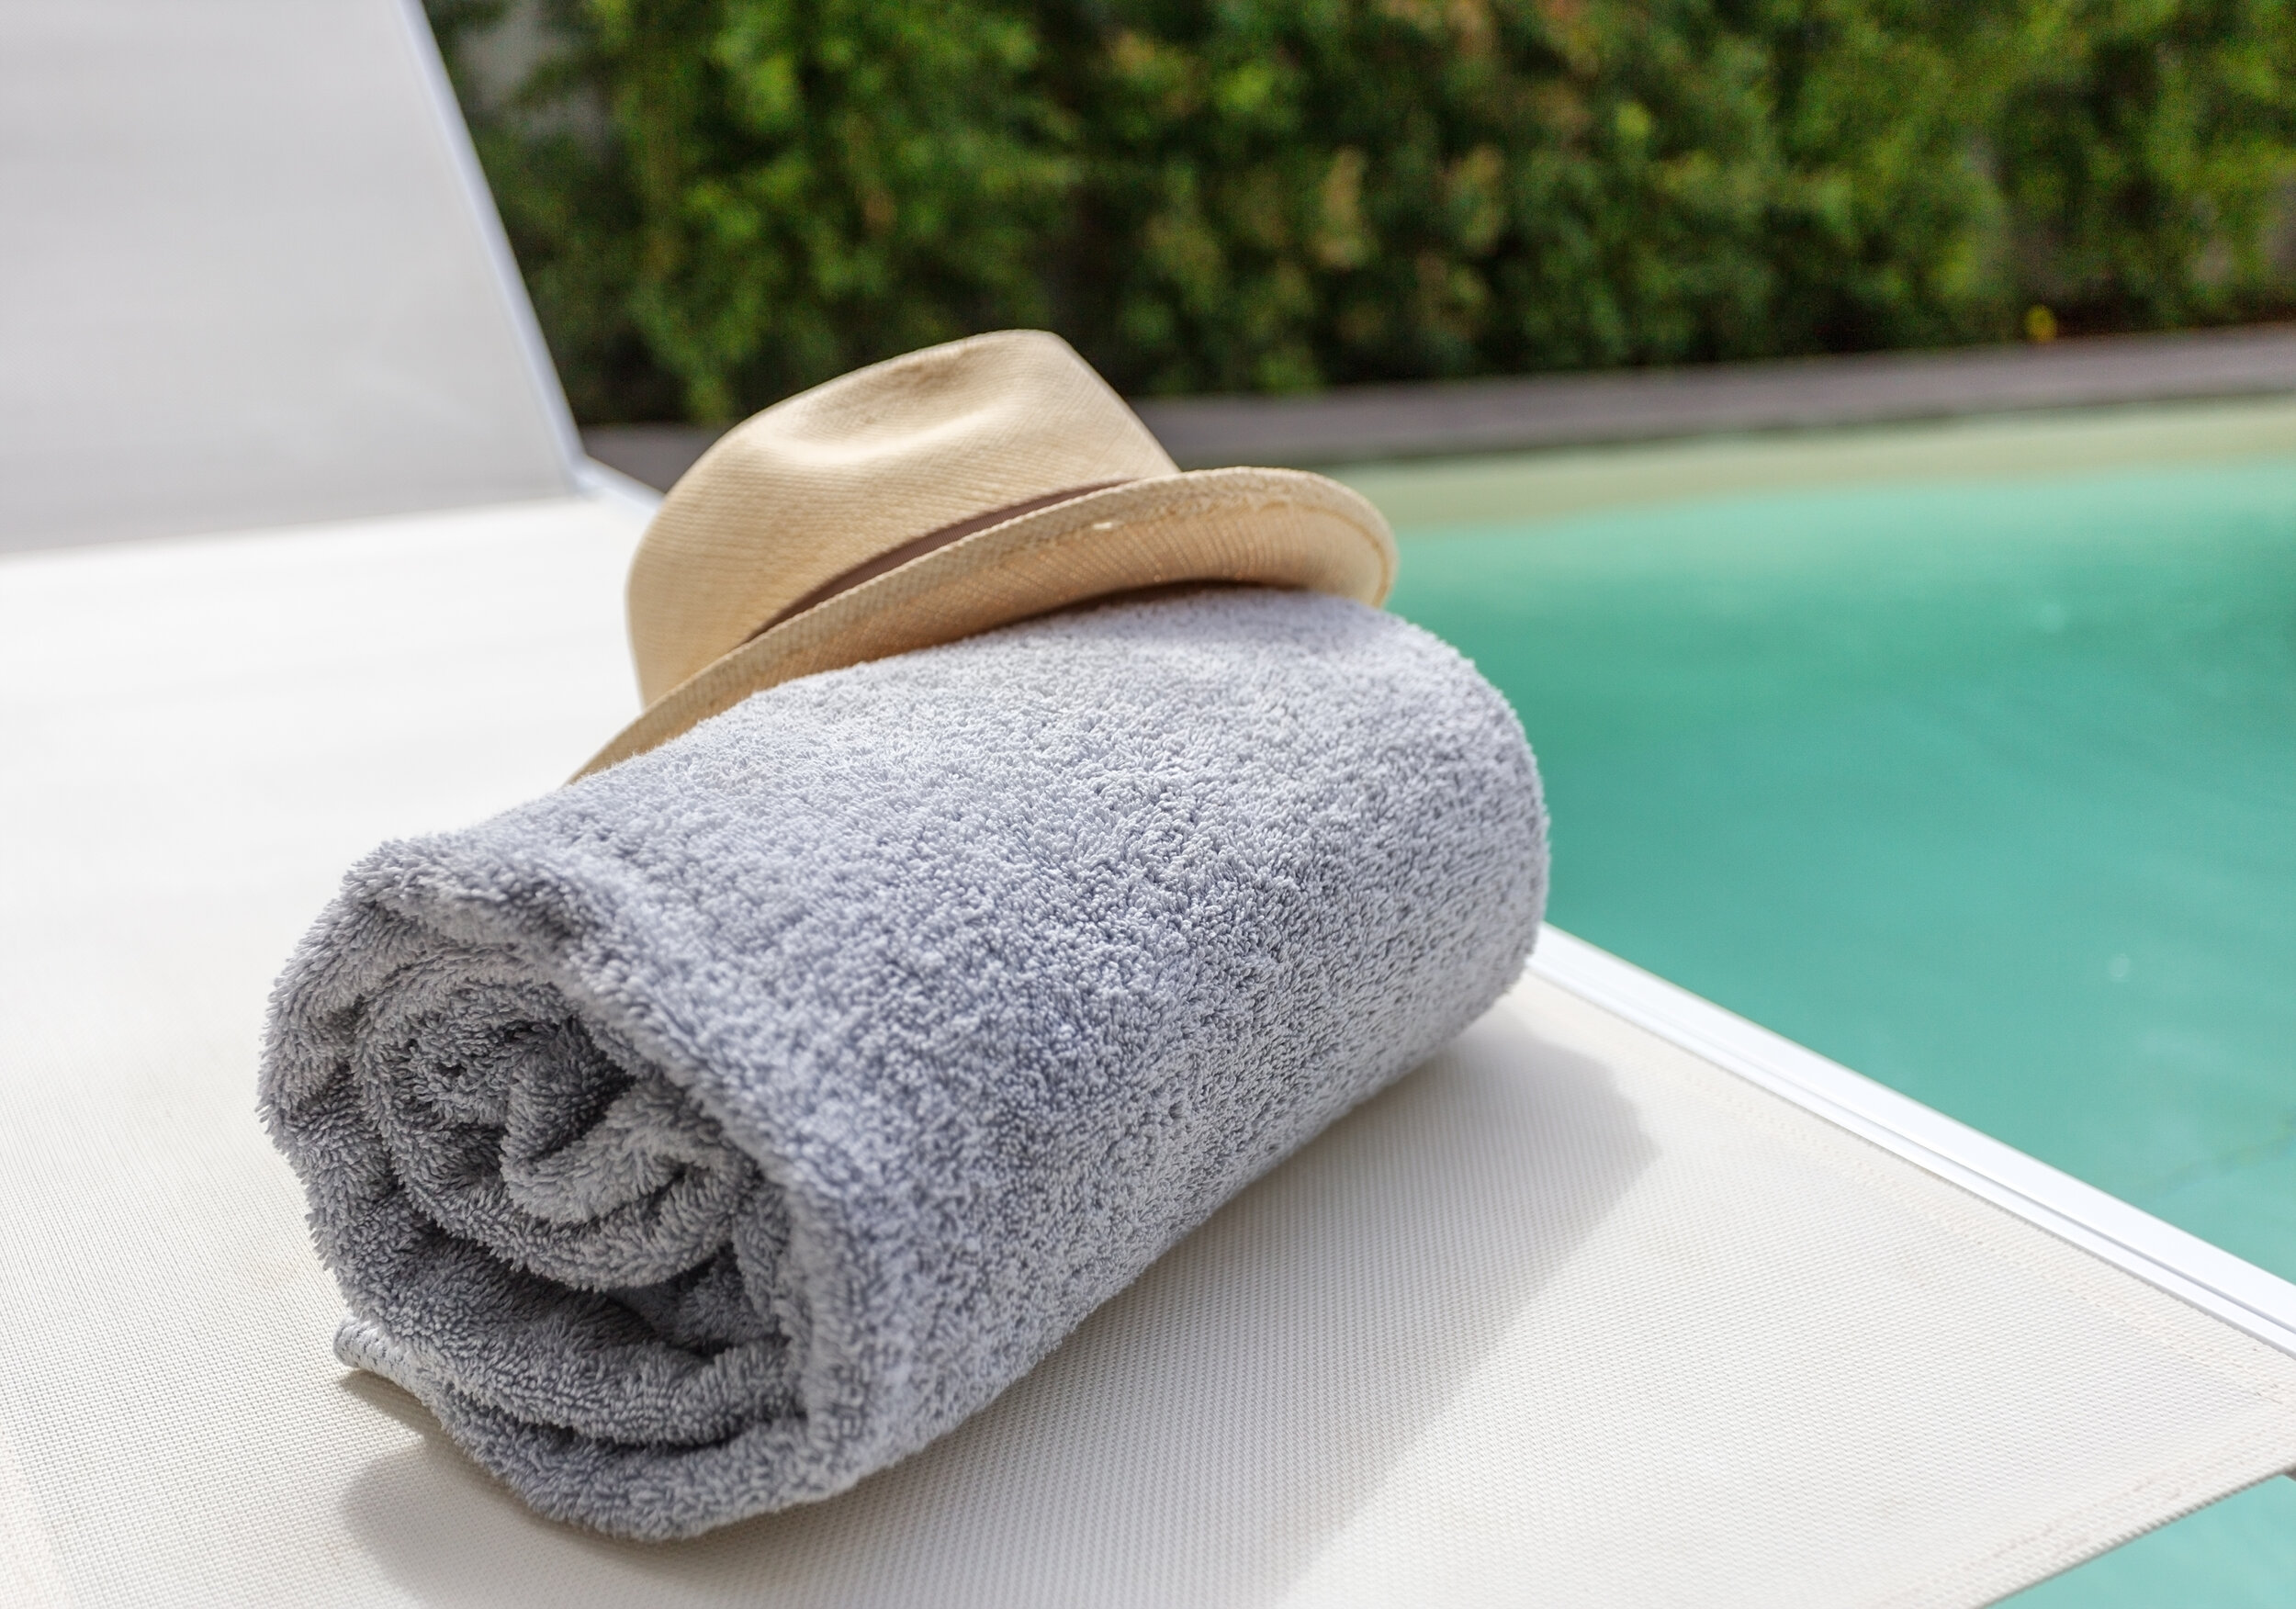 How to Identify and Choose High Quality Bath Towels: 4 Steps